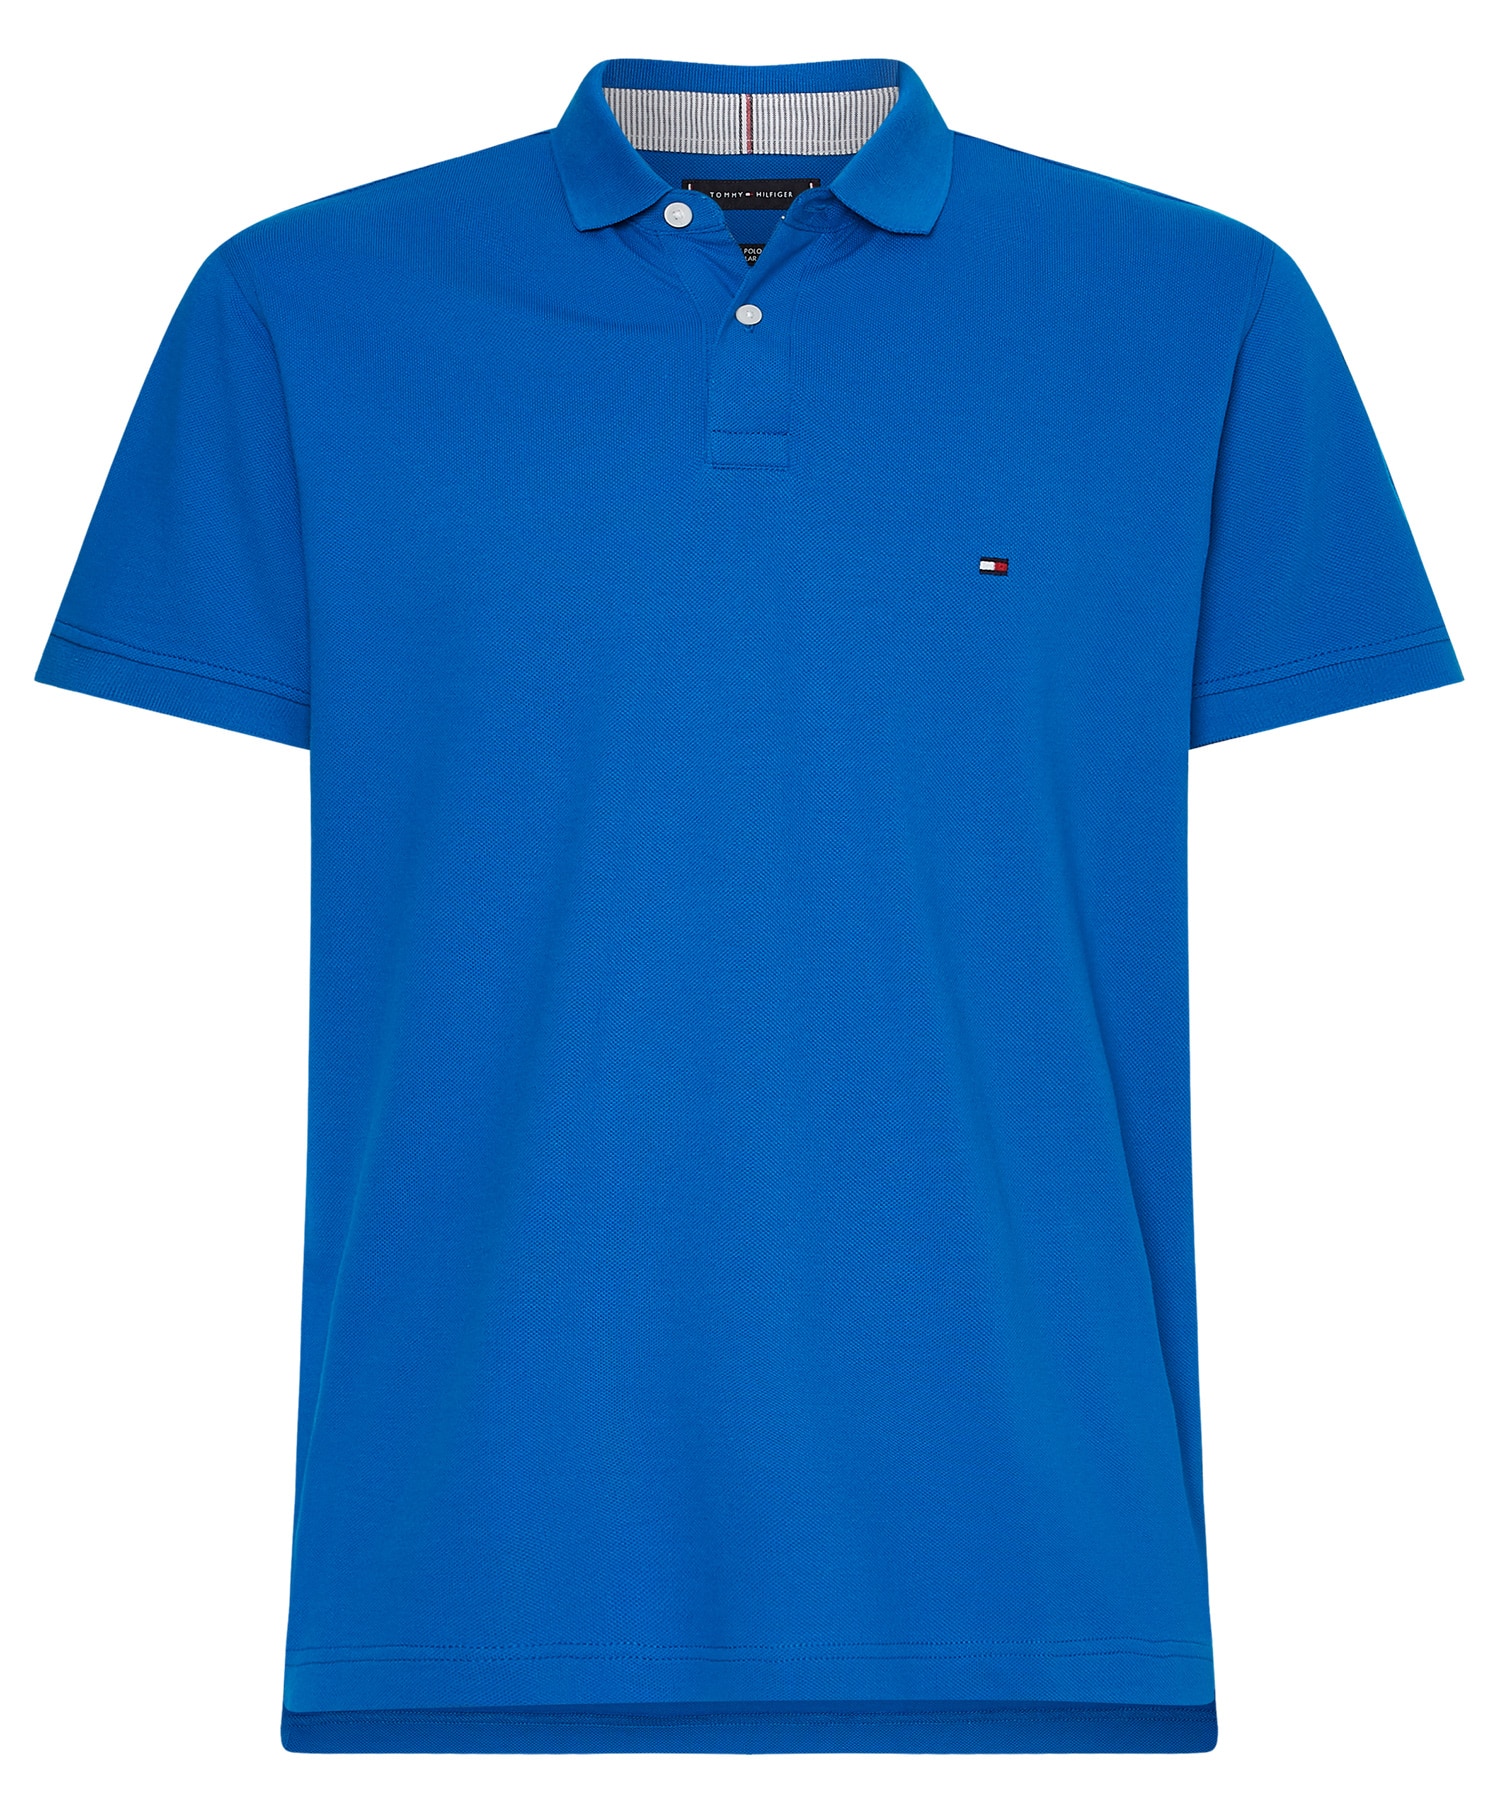 Tommy Hilfiger 1985 Polo